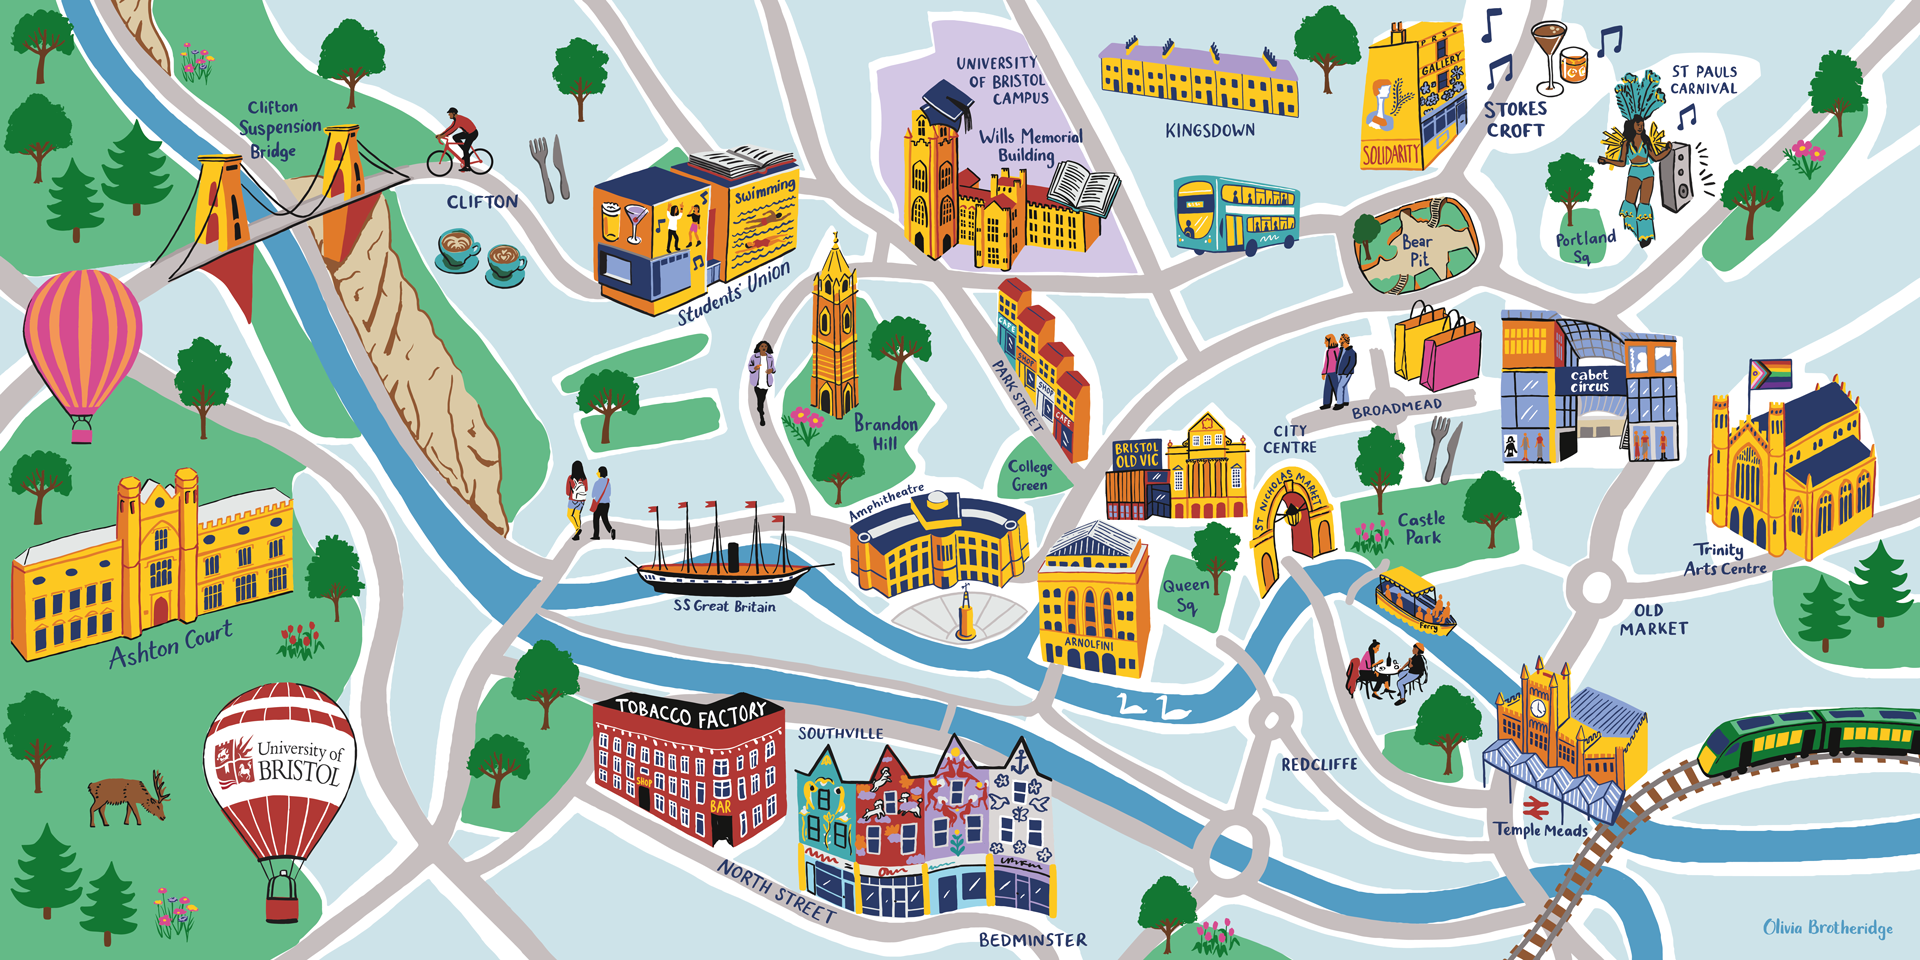 Illustrative map of bristol featuring key locations in the city